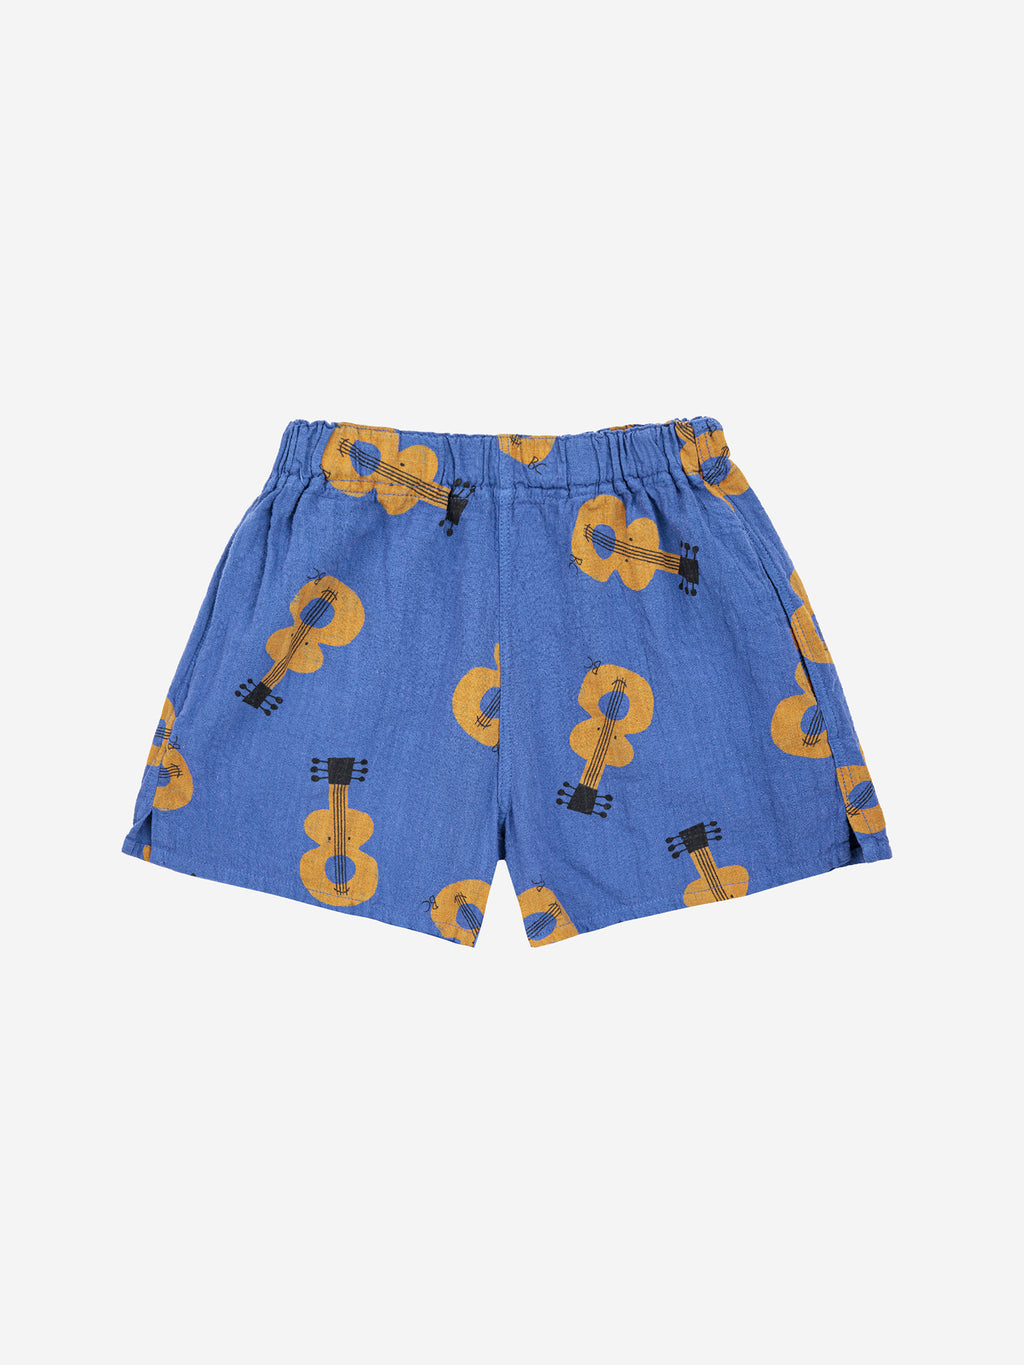 Bobo Choses Acoustic Guitar All Over Woven Shorts - Navy Blue